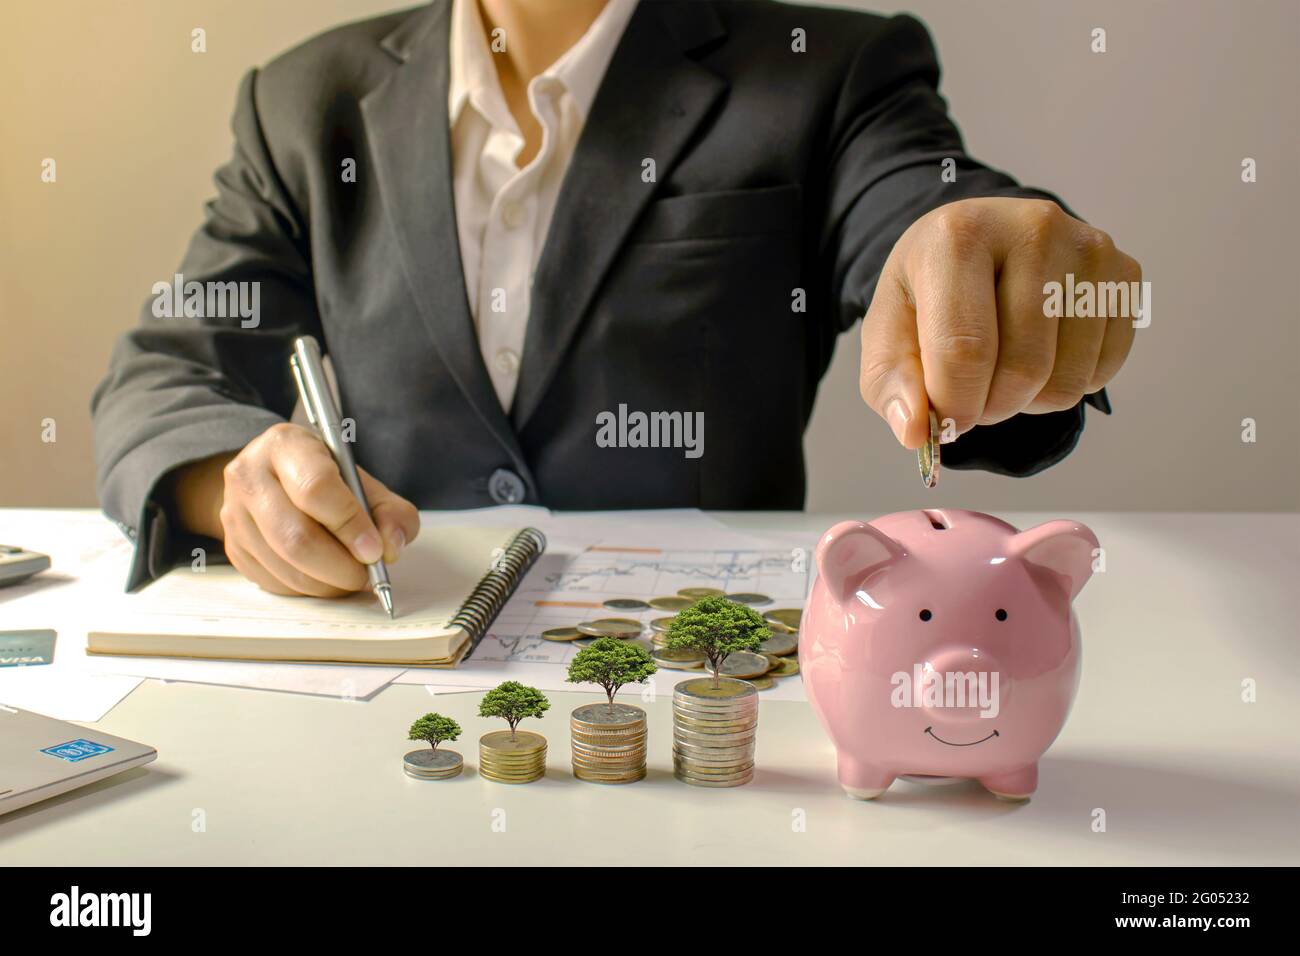 Businessmen are putting coins in piggy banks, pigs and growing plants on coins rising for business, finance and accounting ideas. Stock Photo